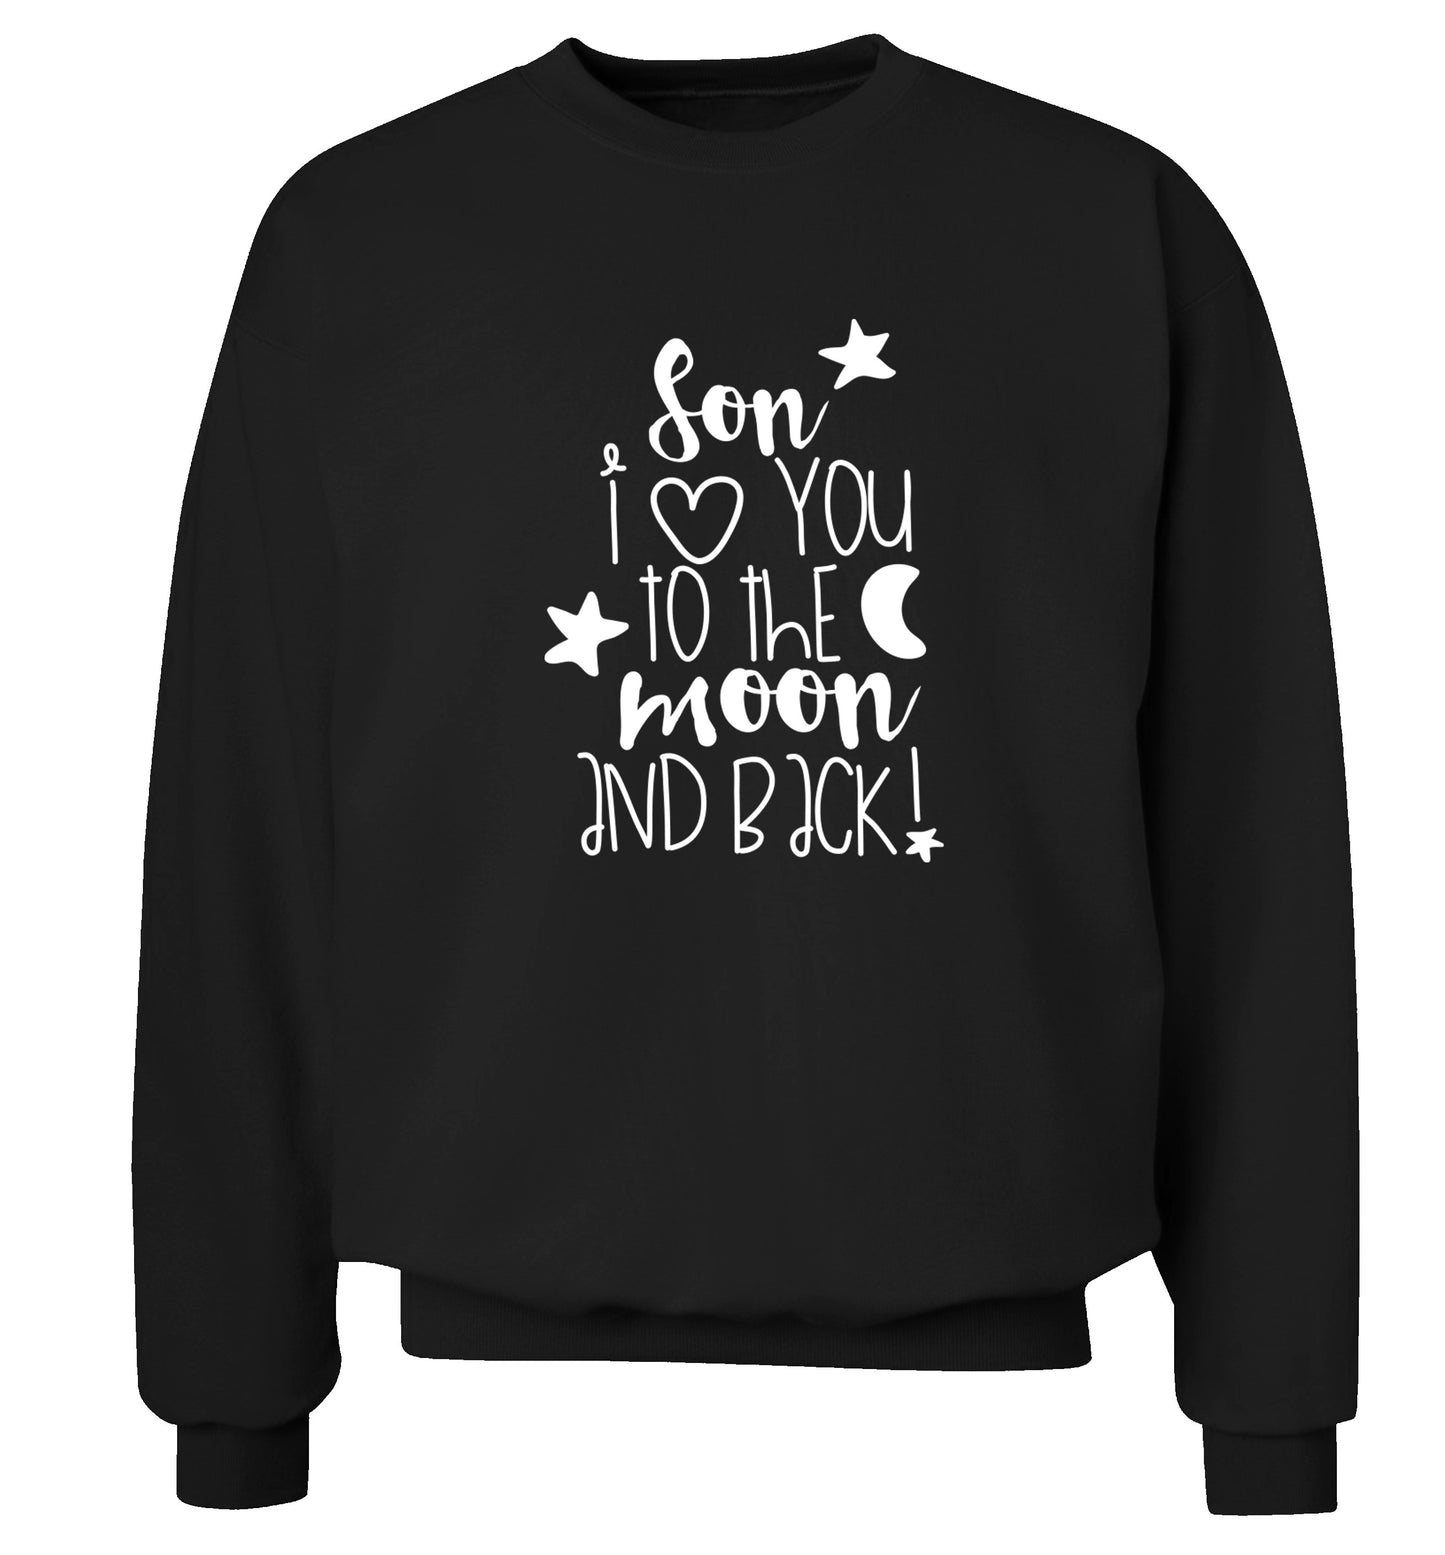 Son I love you to the moon and back Adult's unisex black  sweater 2XL